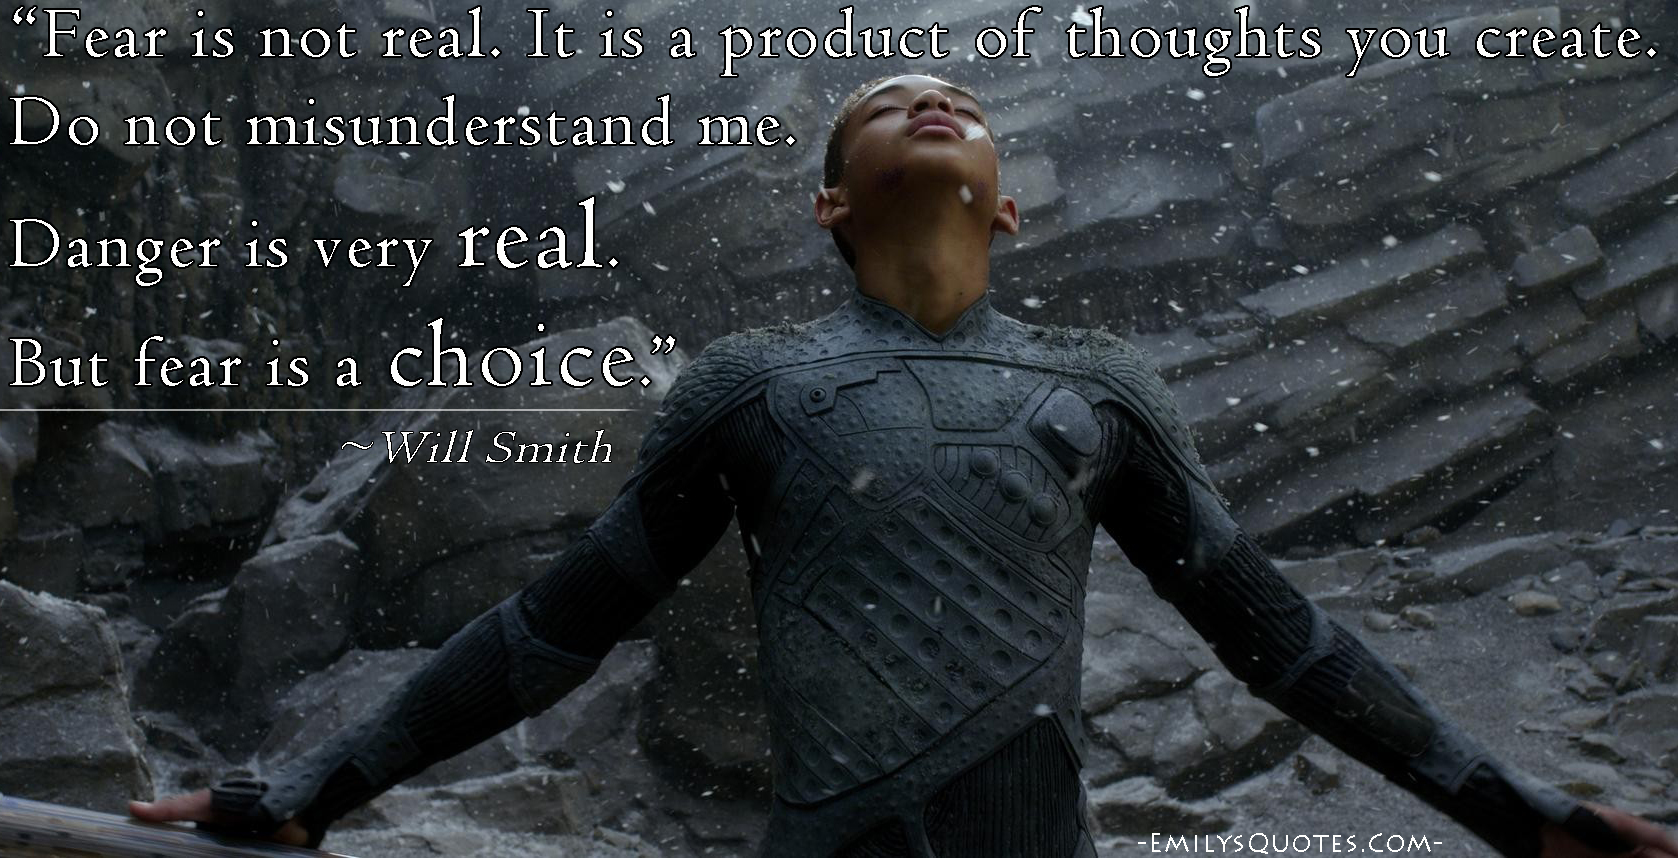 Fear is not real. It is a product of thoughts you create. Do not misunderstand me. Danger is very real. But fear is a choice. Will Smith